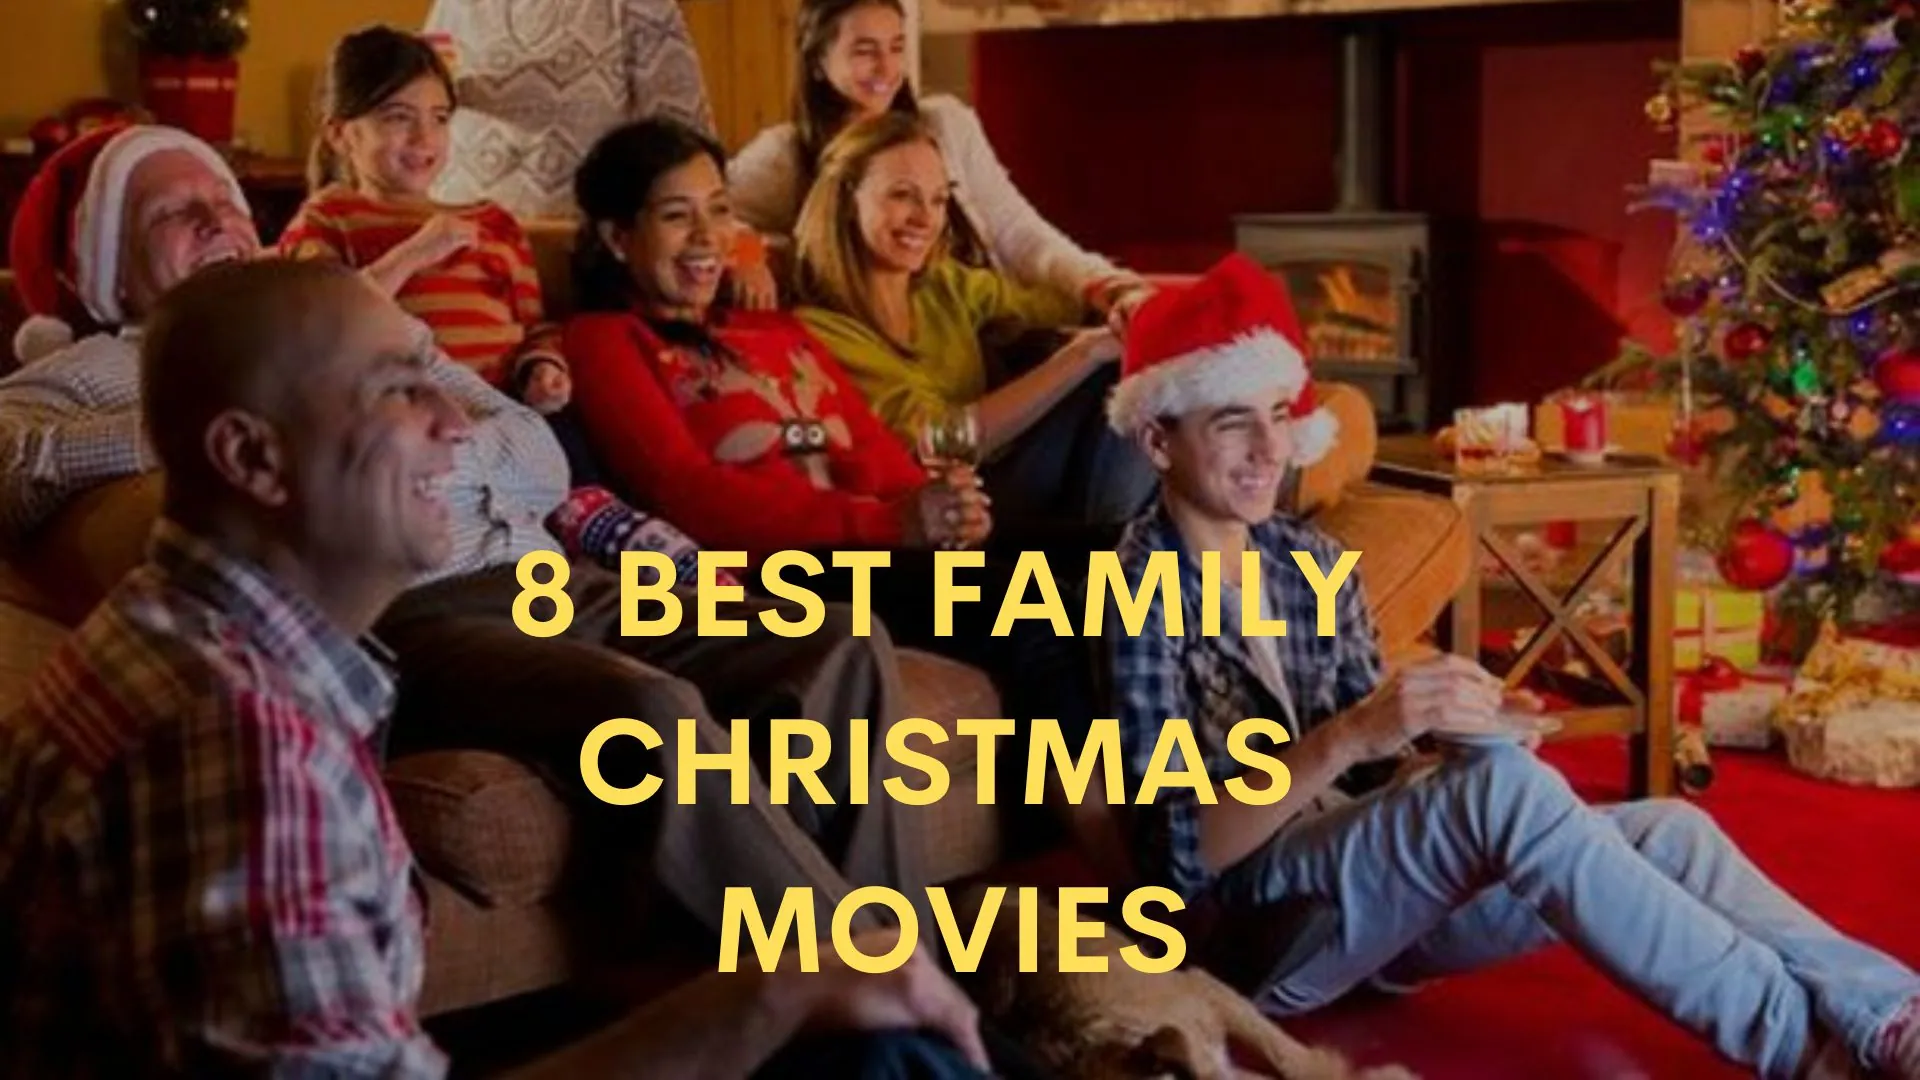 8 Best Family Christmas Movies